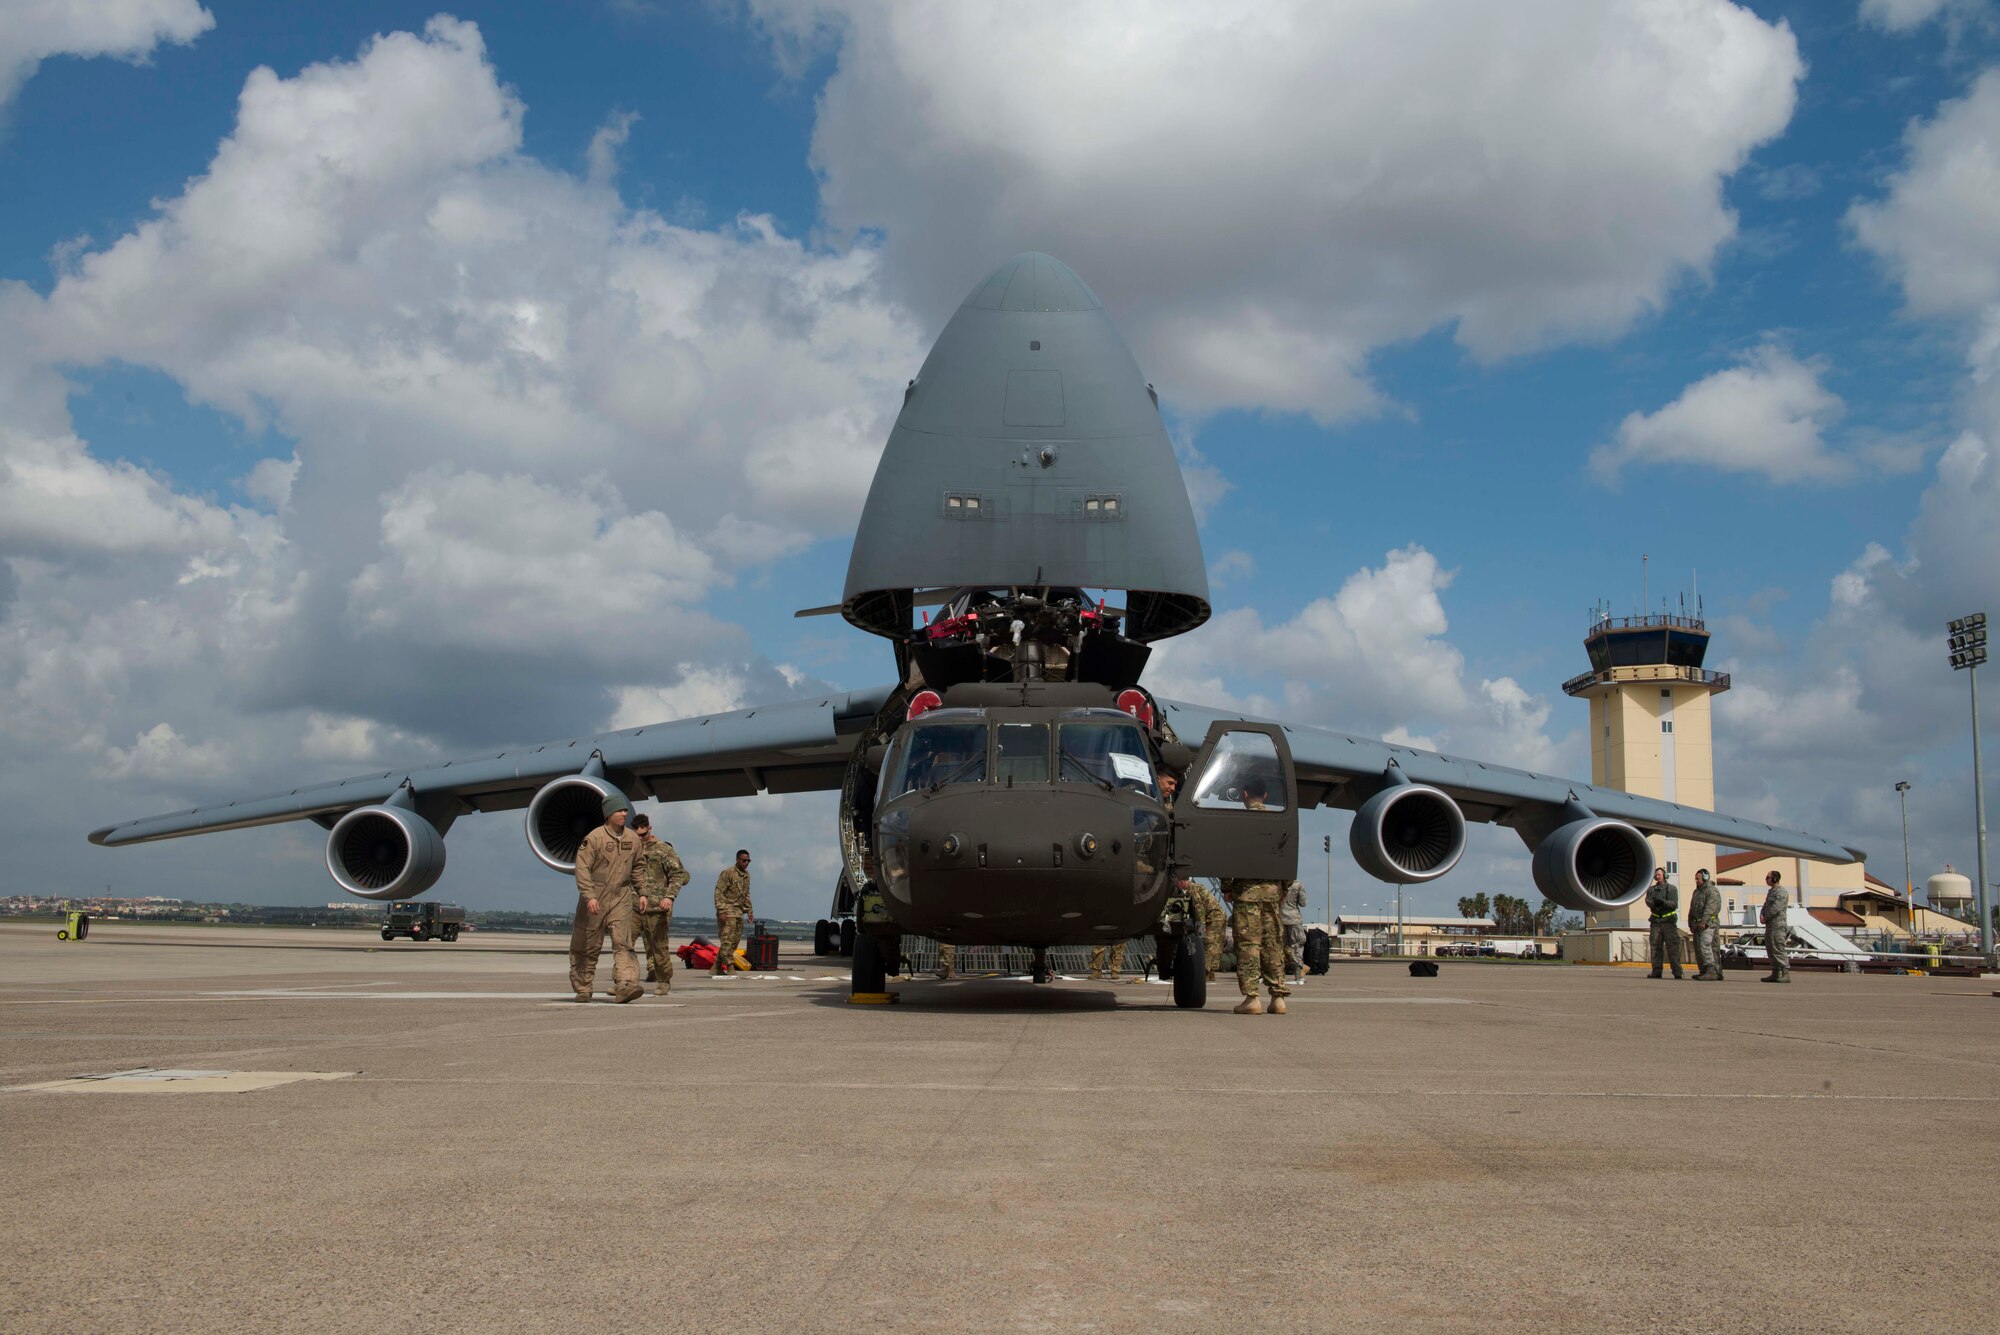 U.S. Airmen with the 22nd Airlift Squadron and U.S. Soldiers with the 3rd Battalion, 501st Regiment, Combat Aviation Brigade, 1st Armored Division prepare to load a U.S. Army UH-60 Black Hawk onto a U.S. Air Force C-5M Super Galaxy March 14, 2017, at Incirlik Air Base, Turkey. The unit was deployed to Incirlik in support of Operation Atlantic Resolve. (U.S. Air Force photo by Airman 1st Class Devin M. Rumbaugh)